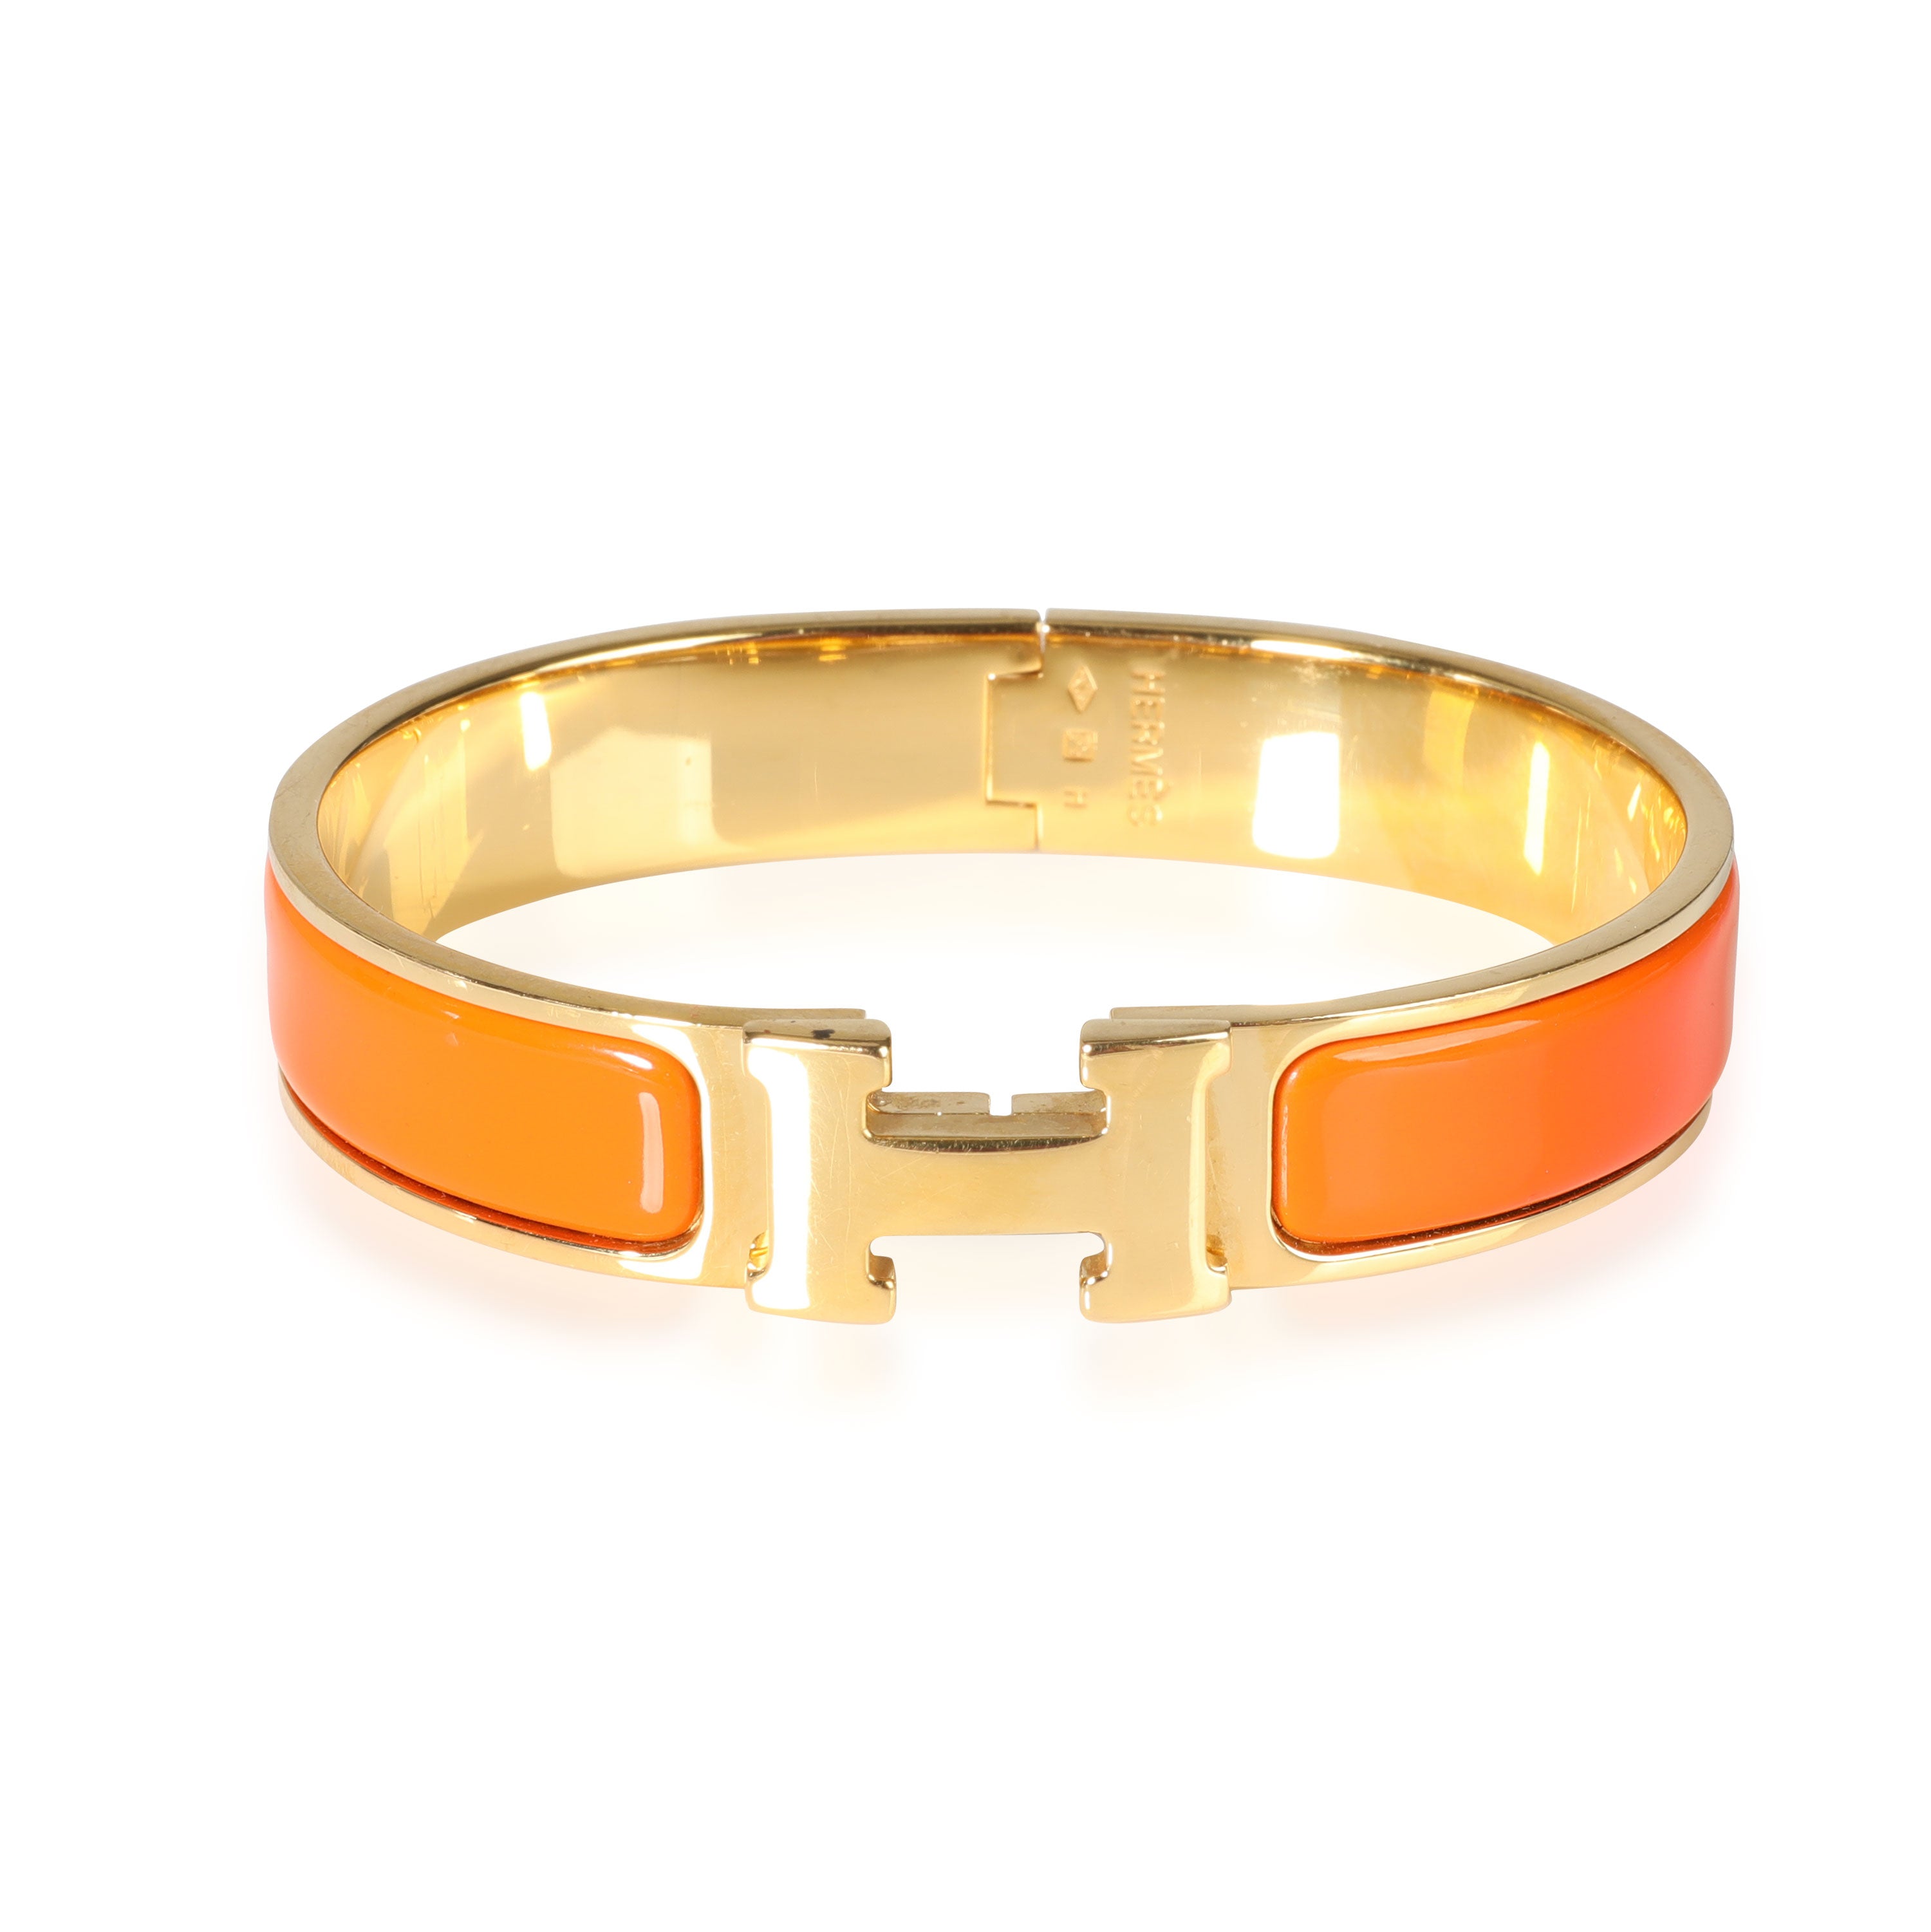 Hermes, Jewelry, Herms Clic H Bracelet 0 Authentic